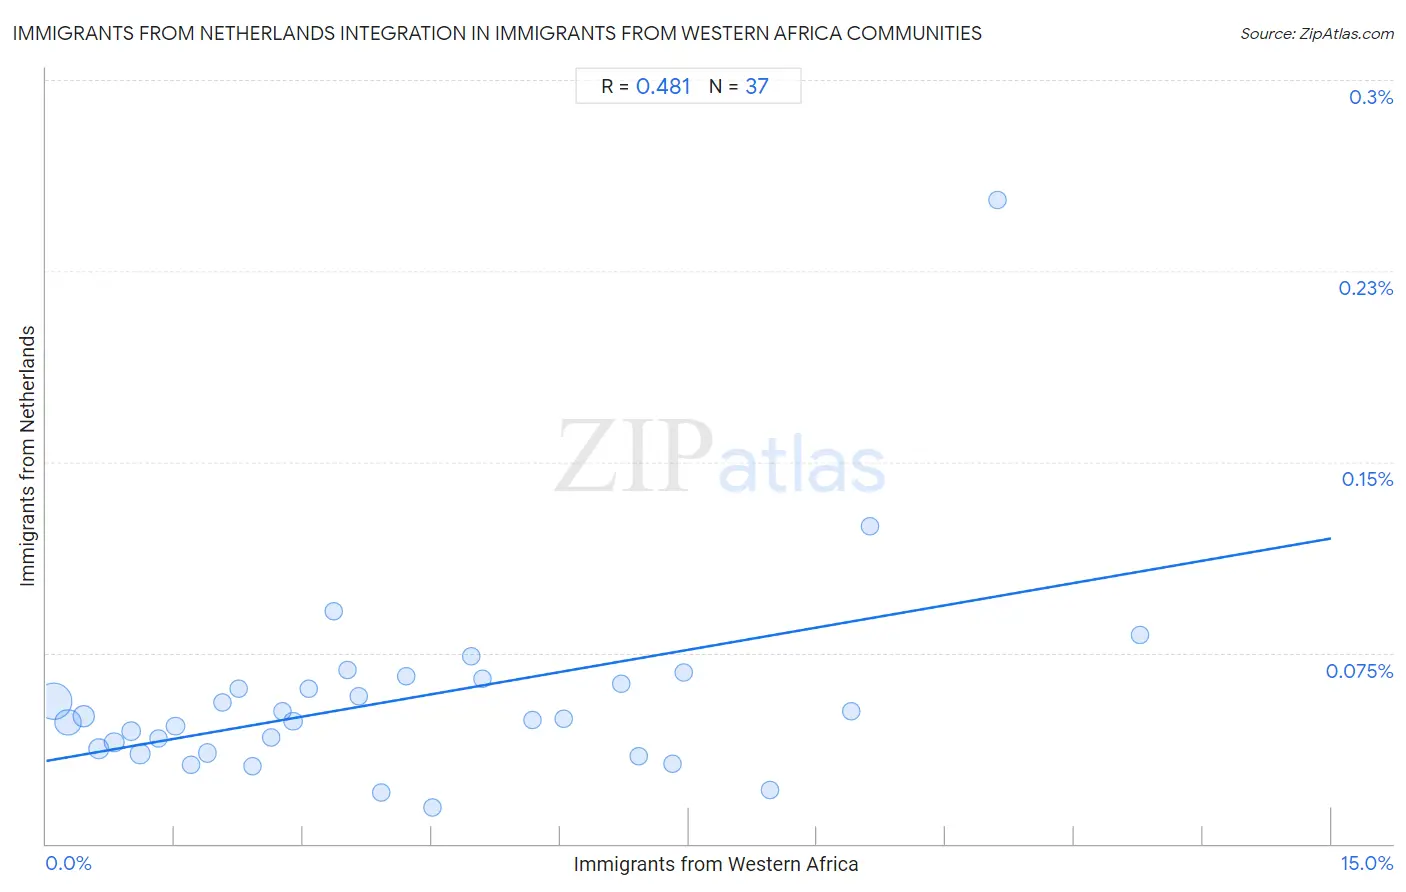 Immigrants from Western Africa Integration in Immigrants from Netherlands Communities